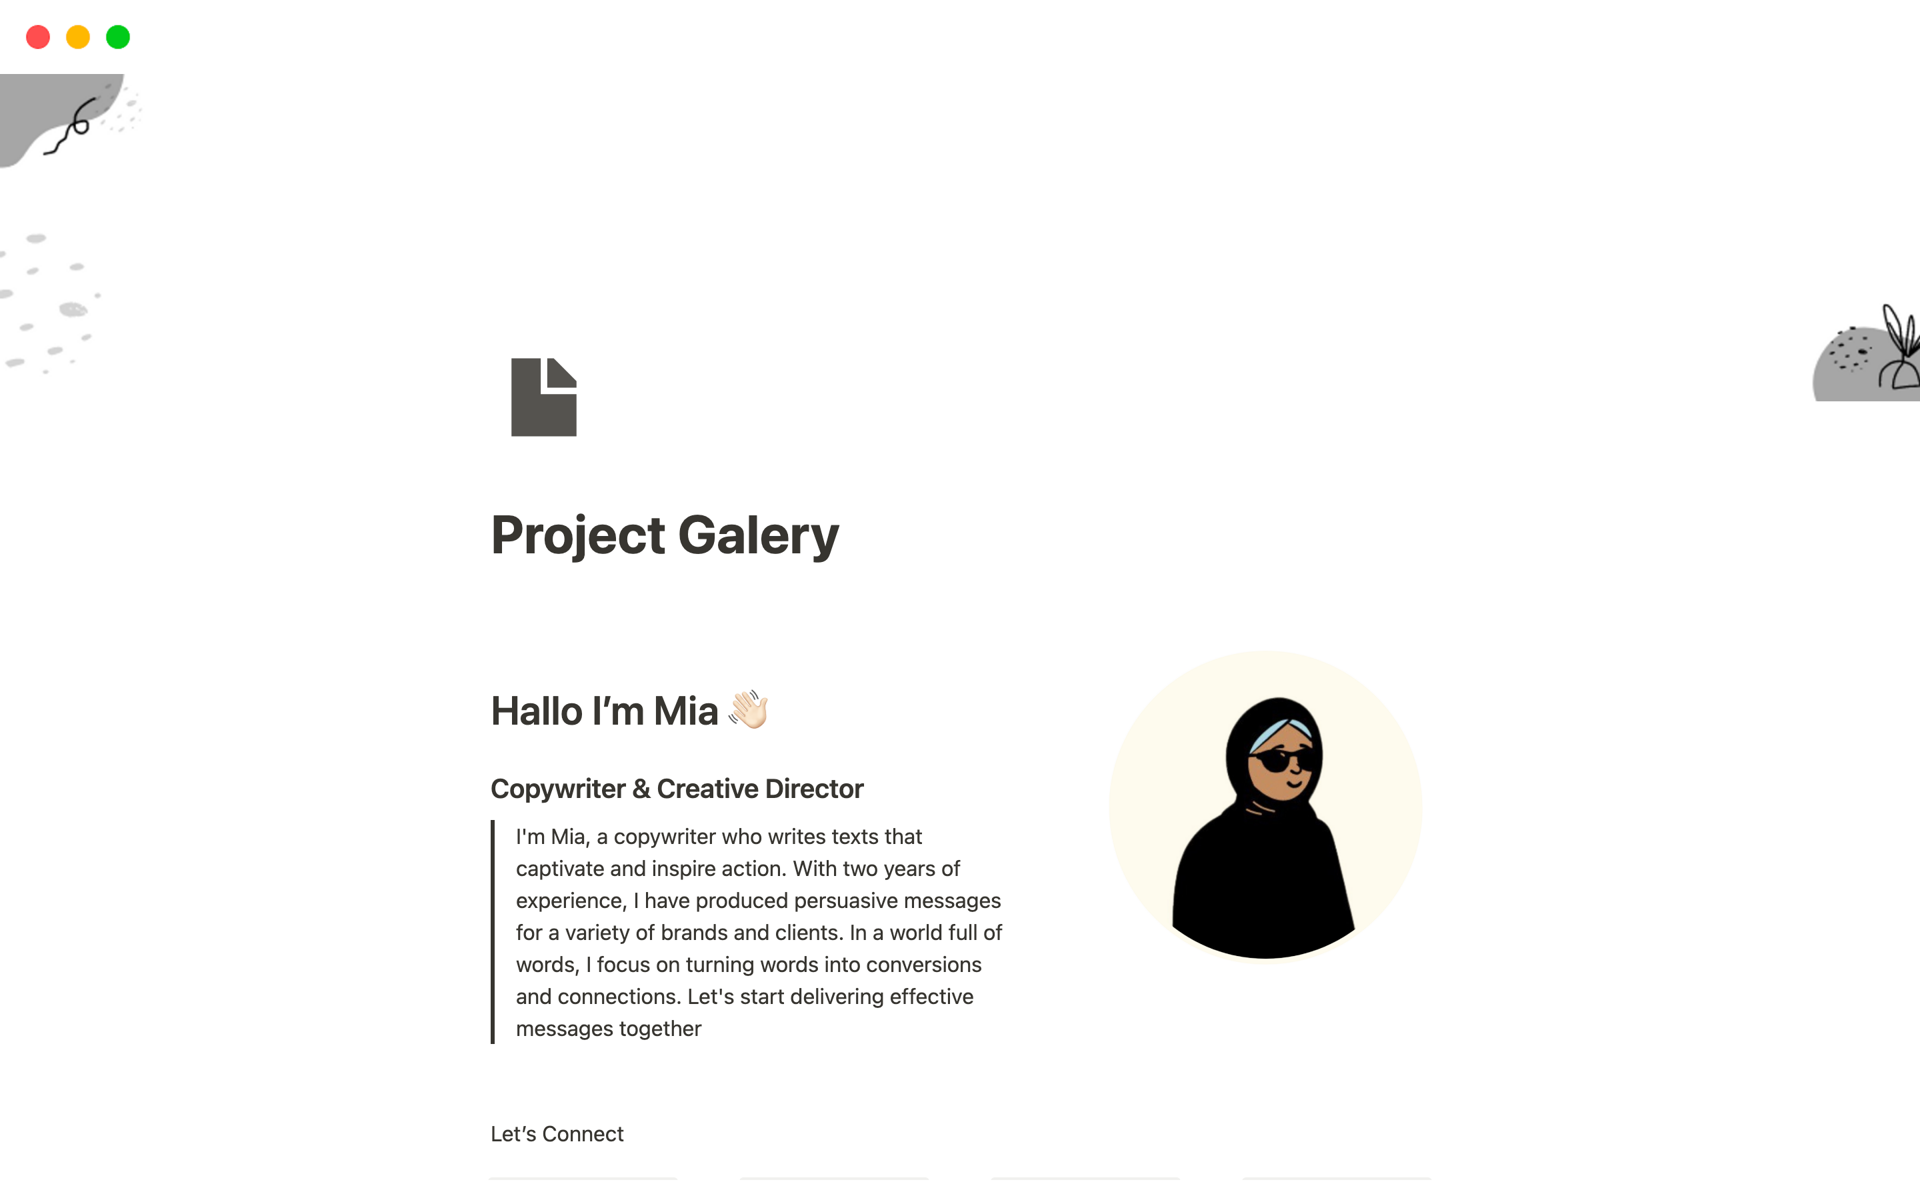 Project Galery is a visually appealing and organized online showcase, created and managed using Notion, a versatile productivity and note-taking tool